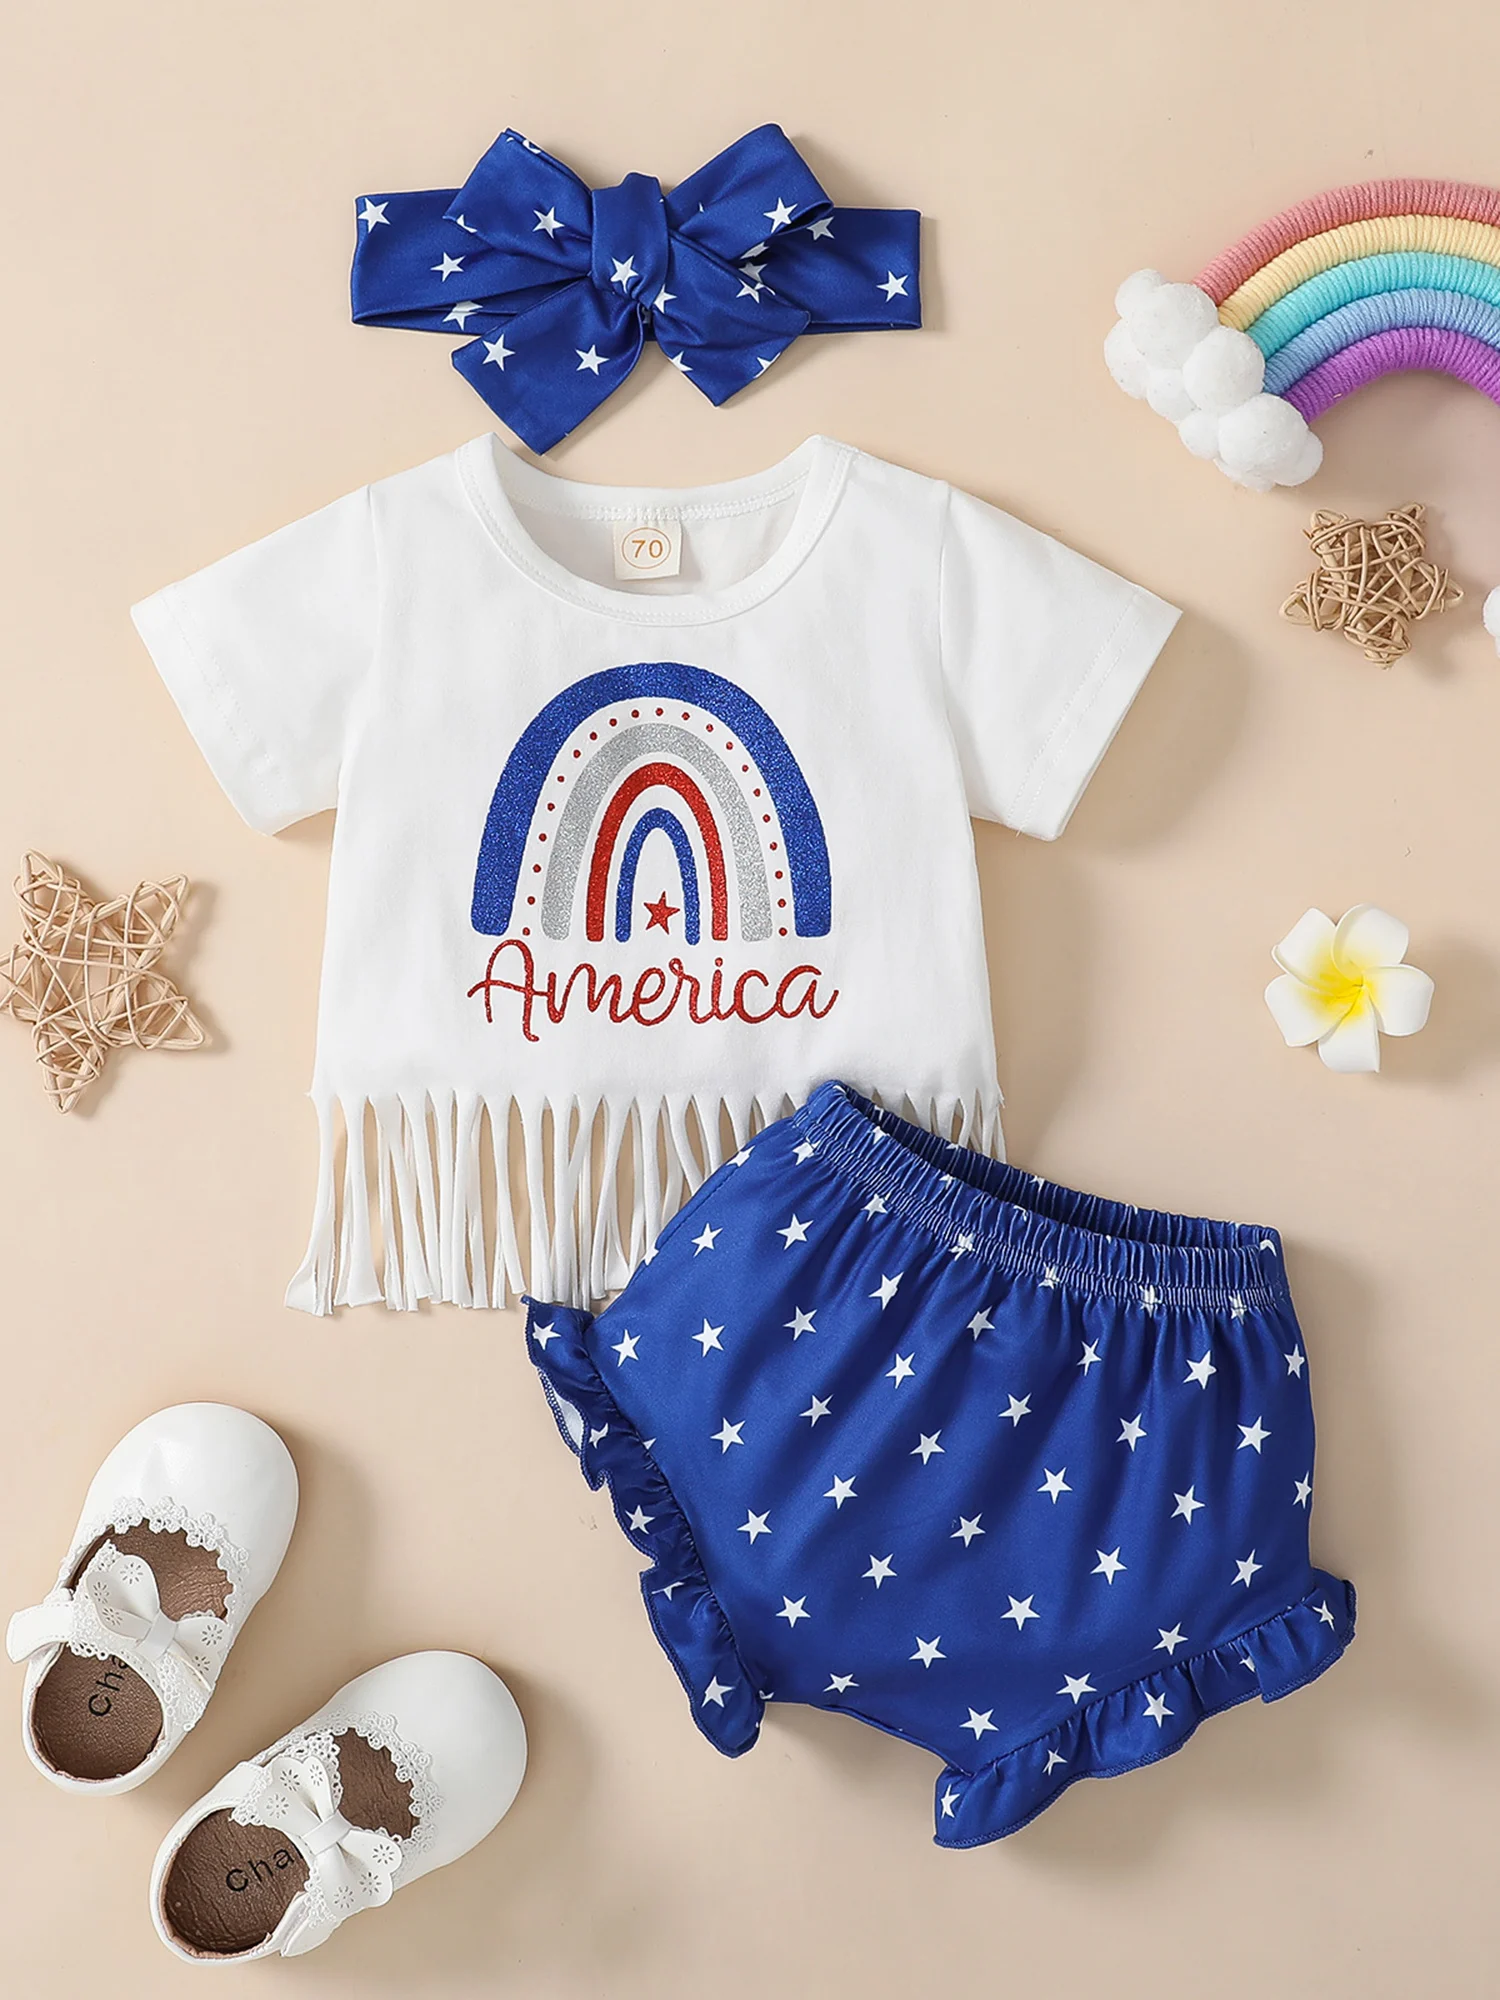 

Baby Girl 4th of July Outfit Newborn Tassels T-Shirt Top Shorts Set Toddler Memorial Day American Flag Clothes (American